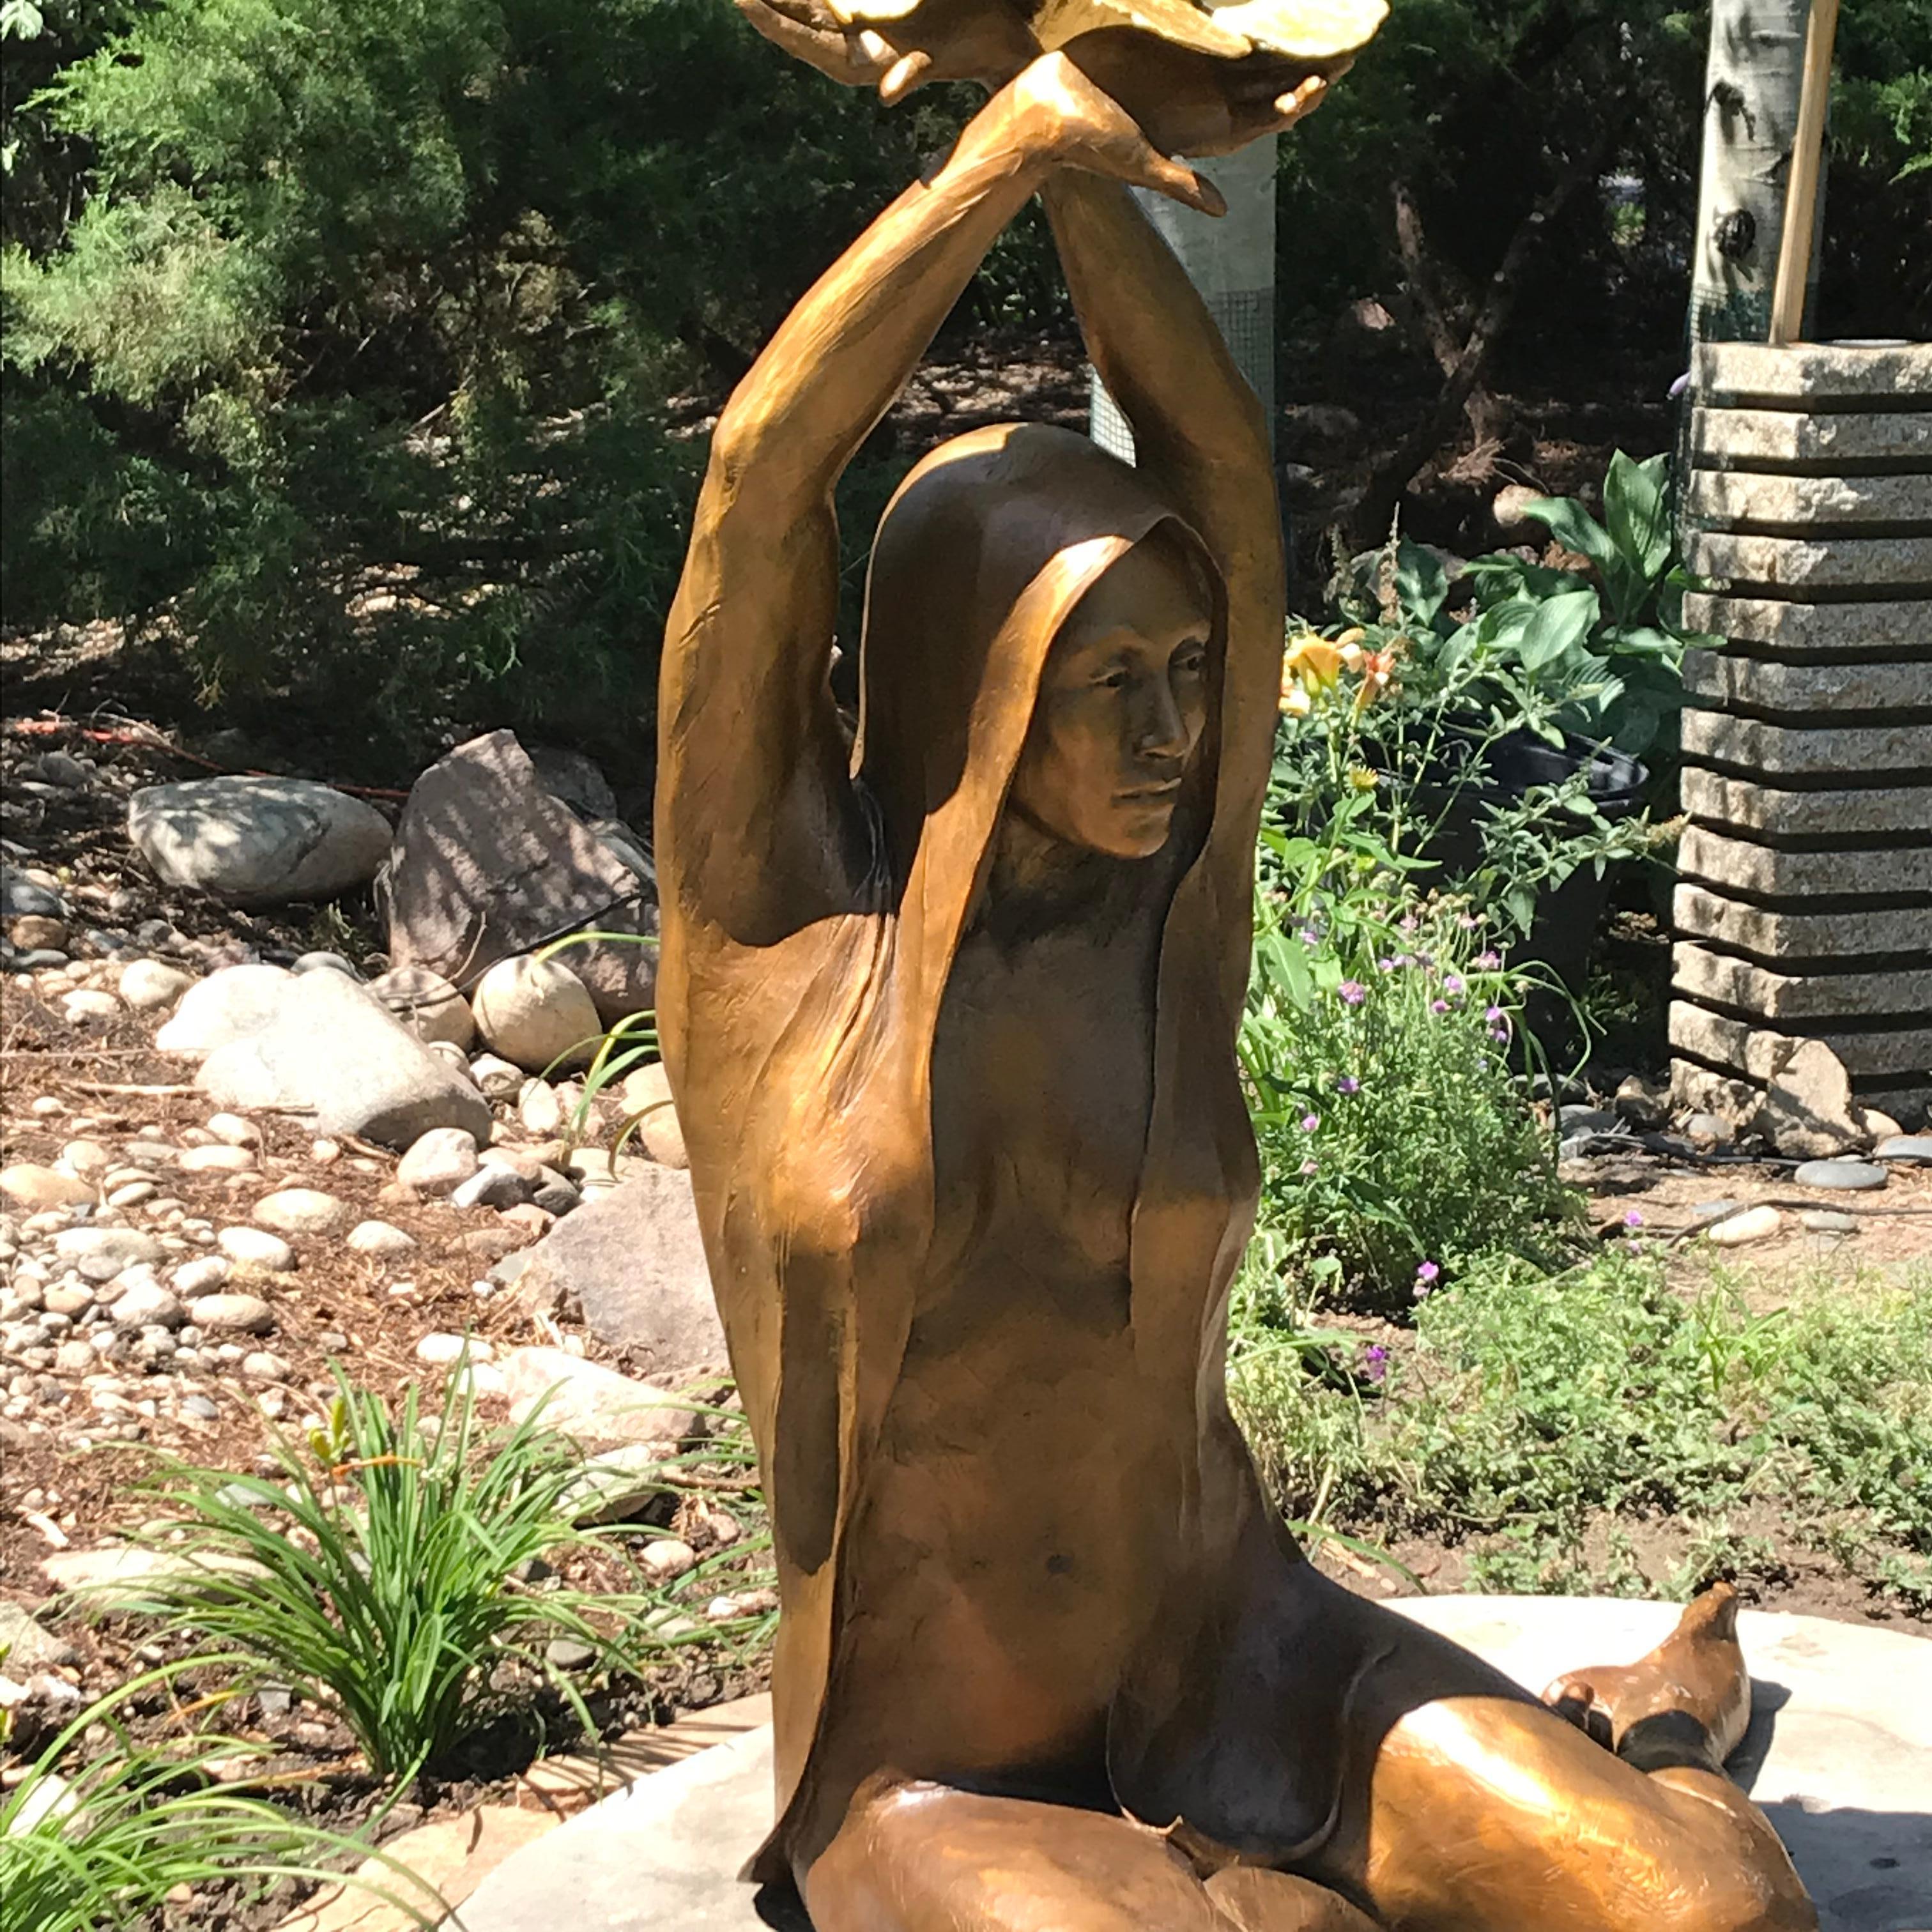 Transform by Denny Haskew
Figurative Bronze with Gold Leaf 5ft x 3ft x 2ft
Nude stretching her arms up to fluttering butterflies above her head.
Stone is not included. Shipping cost includes custom packing necessary for safe transport of fine